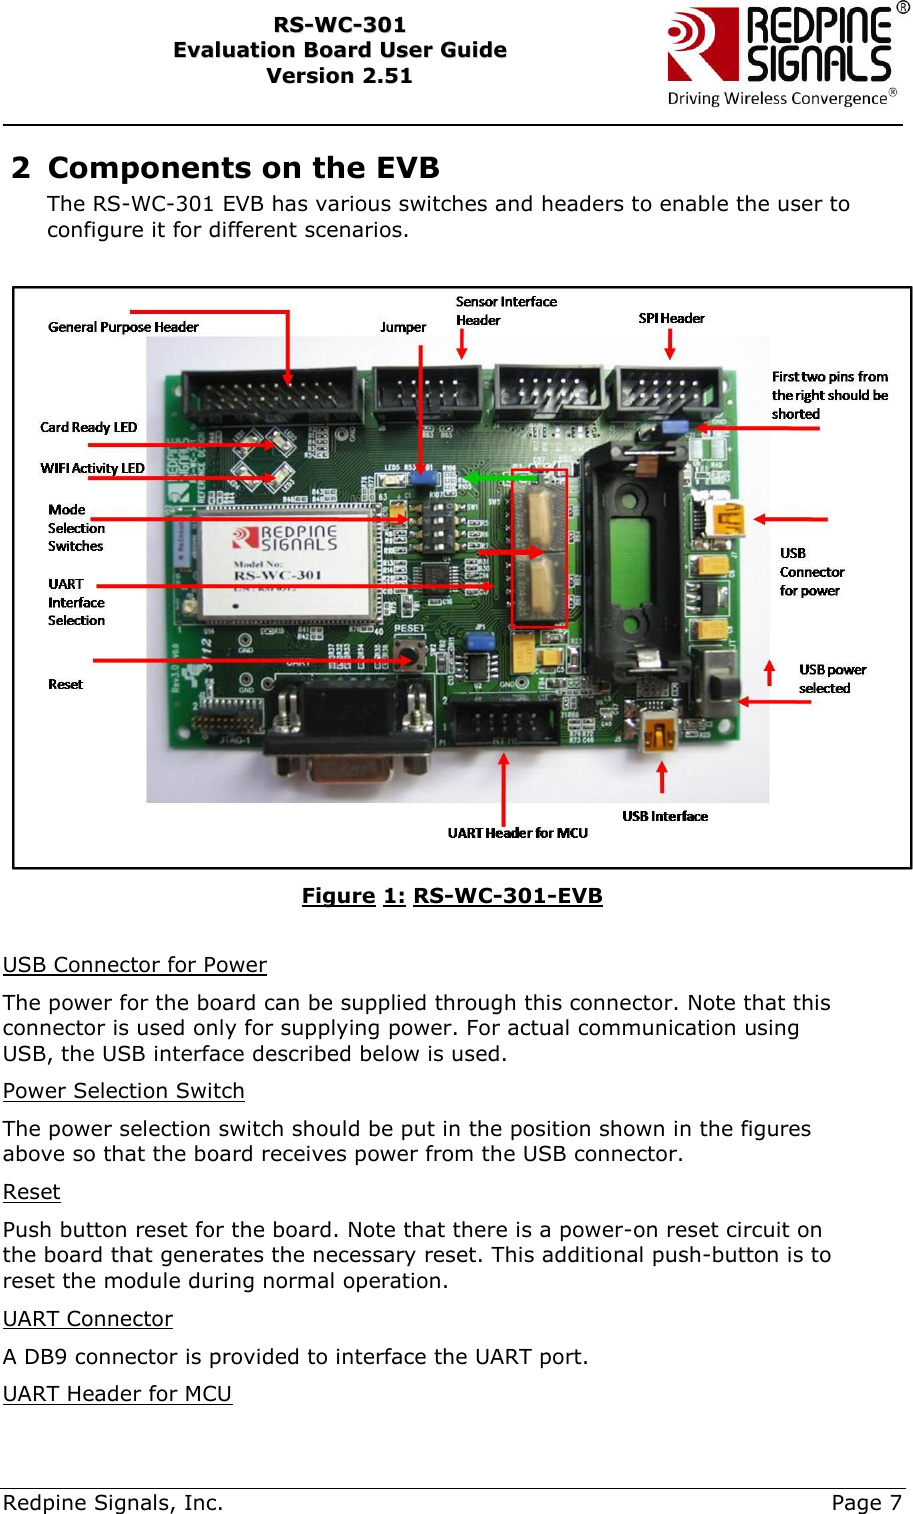     Redpine Signals, Inc.     Page 7 RRSS--WWCC--330011    EEvvaalluuaattiioonn  BBooaarrdd  UUsseerr  GGuuiiddee  VVeerrssiioonn  22..5511    2 Components on the EVB The RS-WC-301 EVB has various switches and headers to enable the user to configure it for different scenarios.    Figure 1: RS-WC-301-EVB   USB Connector for Power The power for the board can be supplied through this connector. Note that this connector is used only for supplying power. For actual communication using USB, the USB interface described below is used.  Power Selection Switch The power selection switch should be put in the position shown in the figures above so that the board receives power from the USB connector. Reset Push button reset for the board. Note that there is a power-on reset circuit on the board that generates the necessary reset. This additional push-button is to reset the module during normal operation. UART Connector A DB9 connector is provided to interface the UART port. UART Header for MCU 